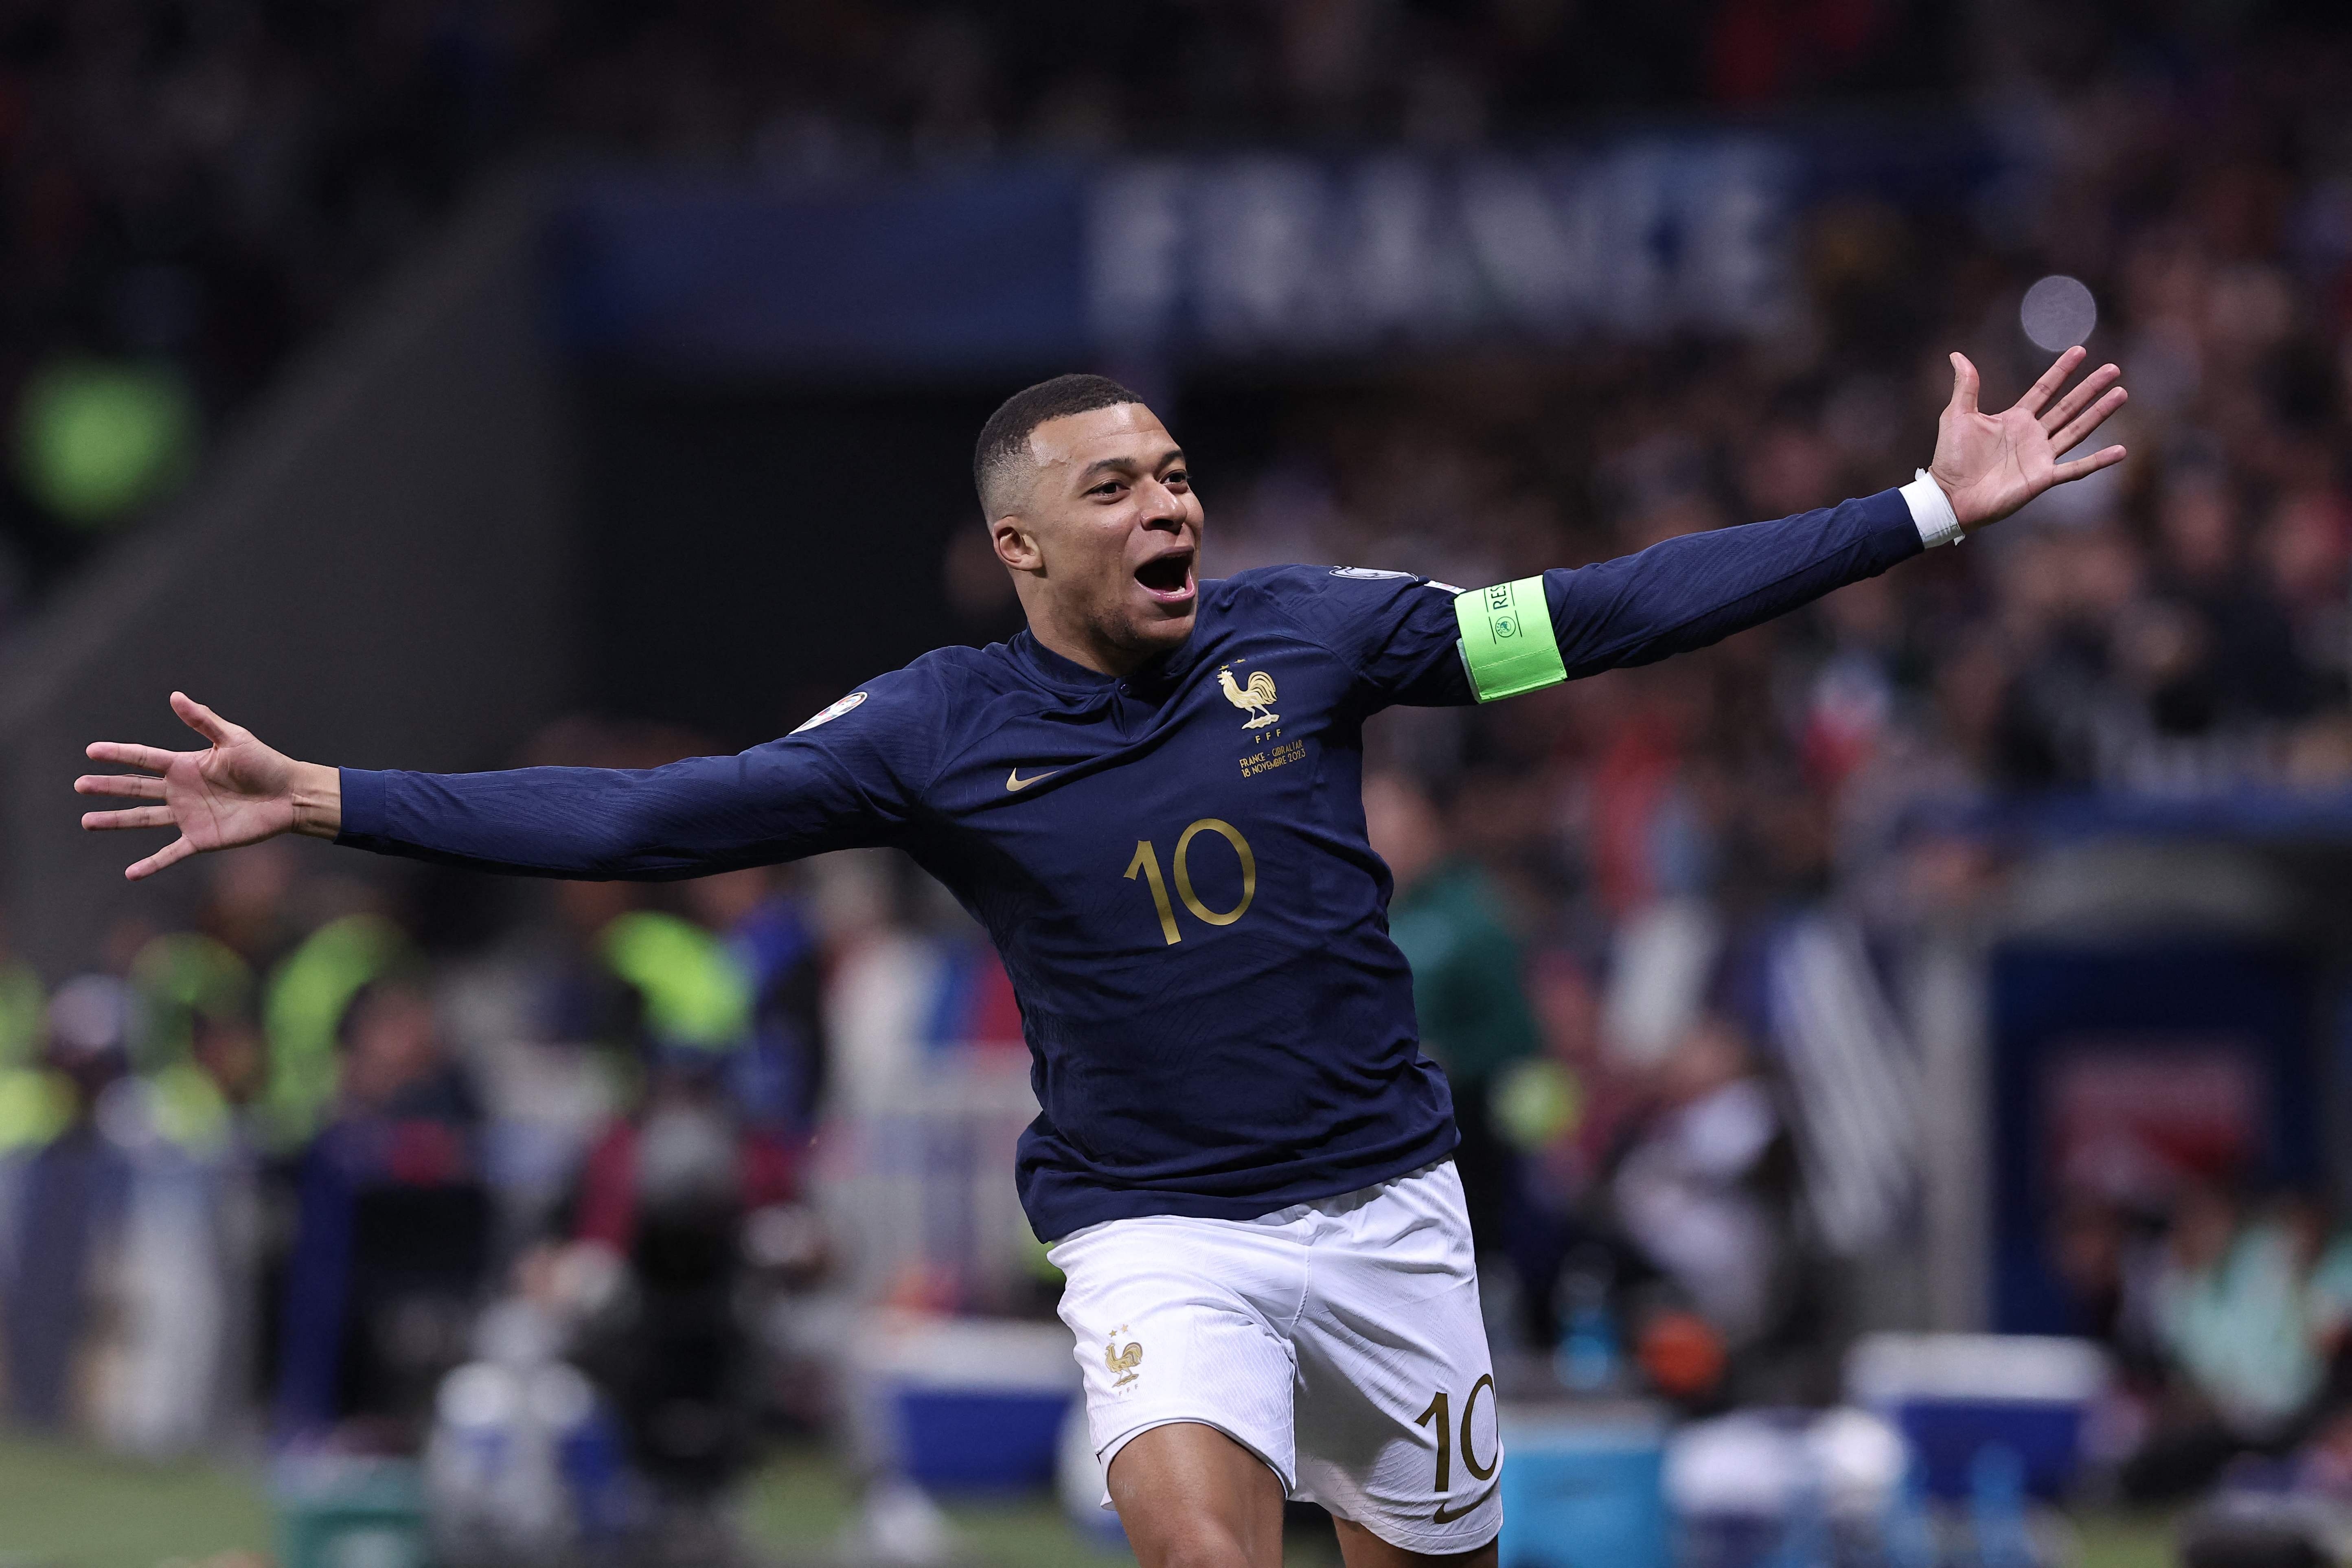 Mbappe scored as France thrashed Scotland in a friendly